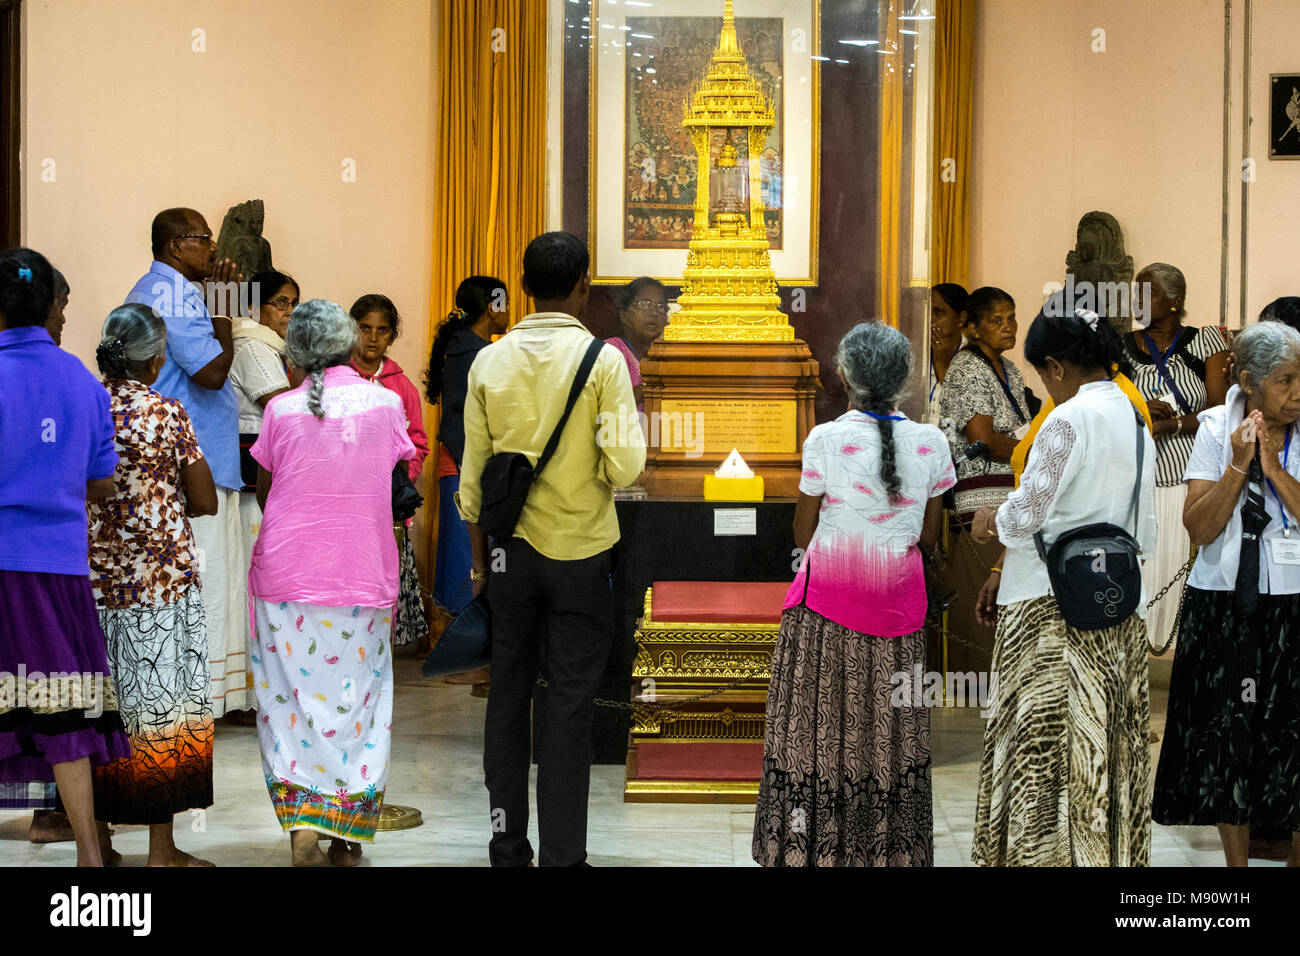 National museum of India, Delhi. Buddhist visitors praying in front of a reliquary. India. Stock Photo